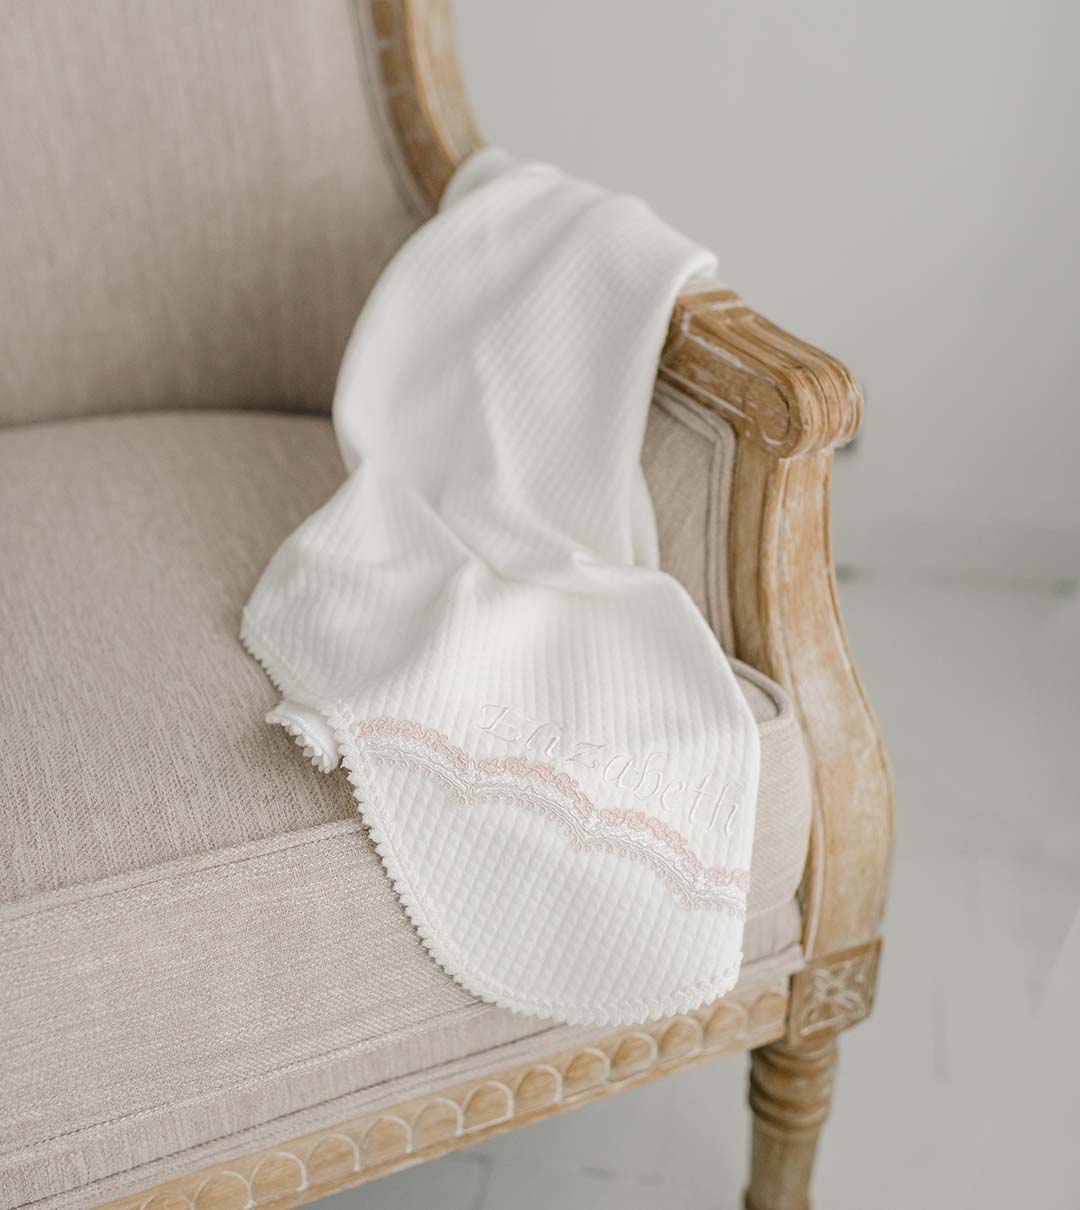 A soft white Elizabeth Personalized Blanket with pink embroidery for baptism is draped over an elegant beige vintage armchair, positioned against a plain white background.